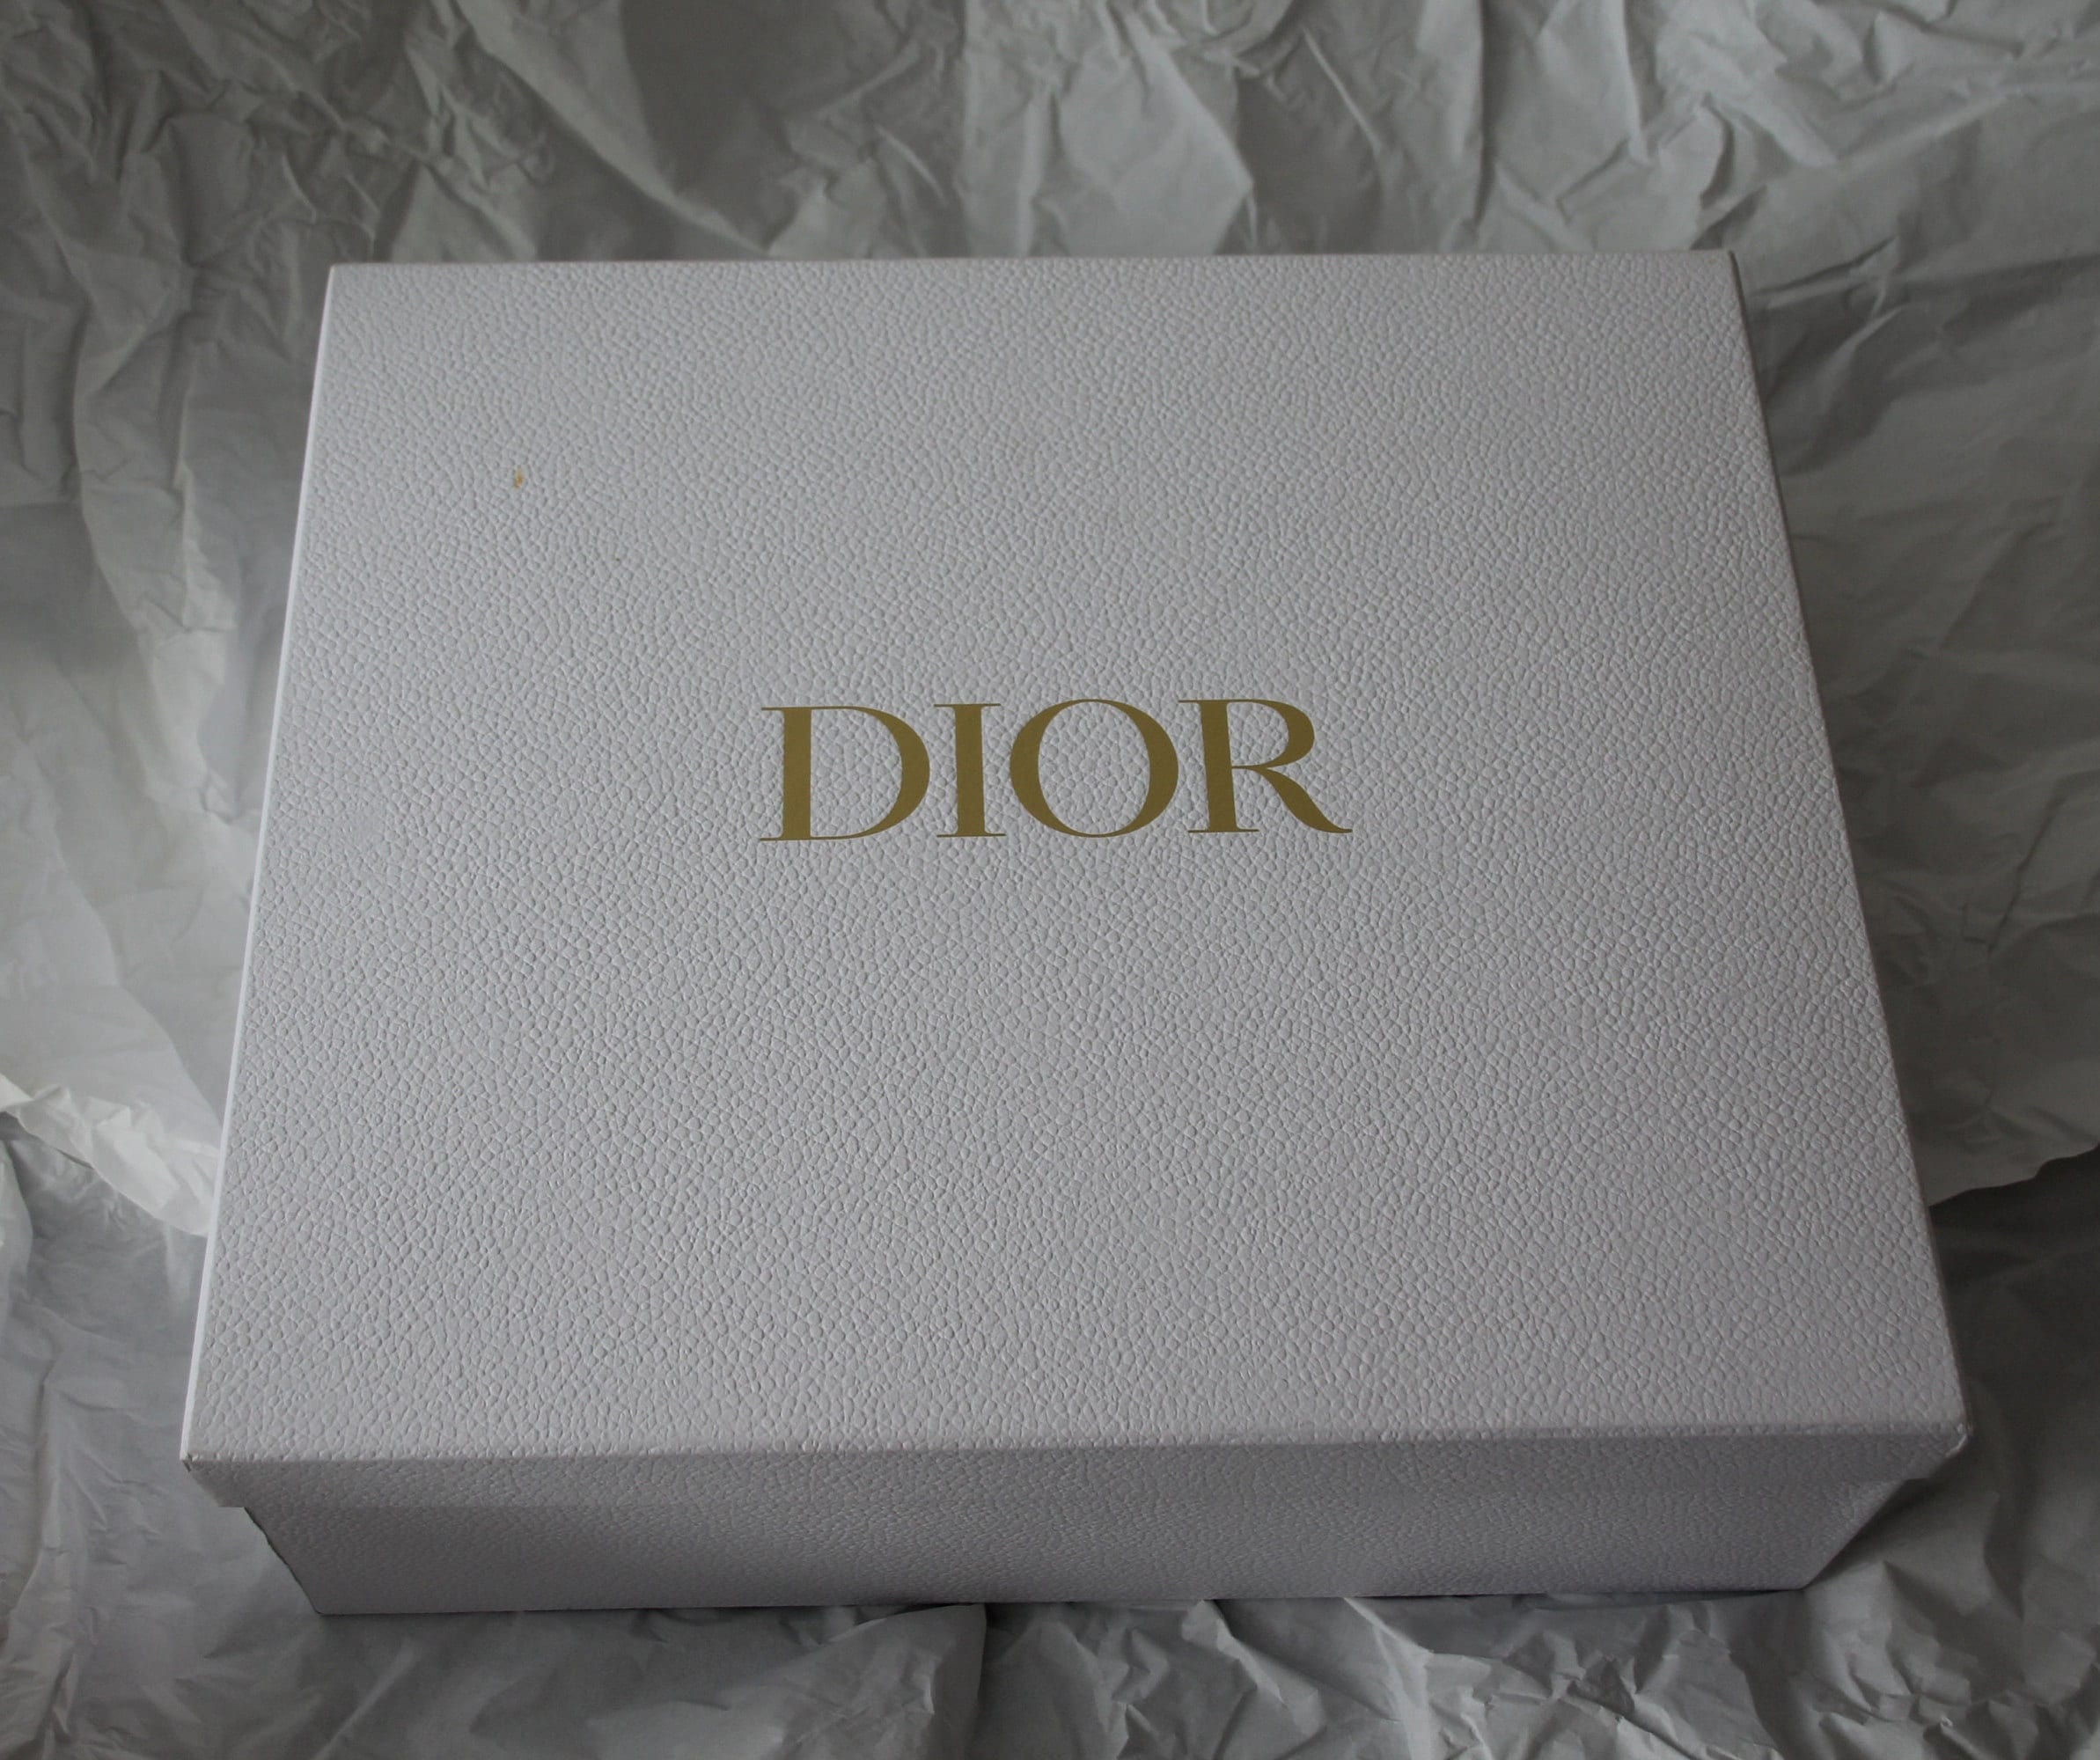 Christian Dior Gold Gift Wrapping Supplies